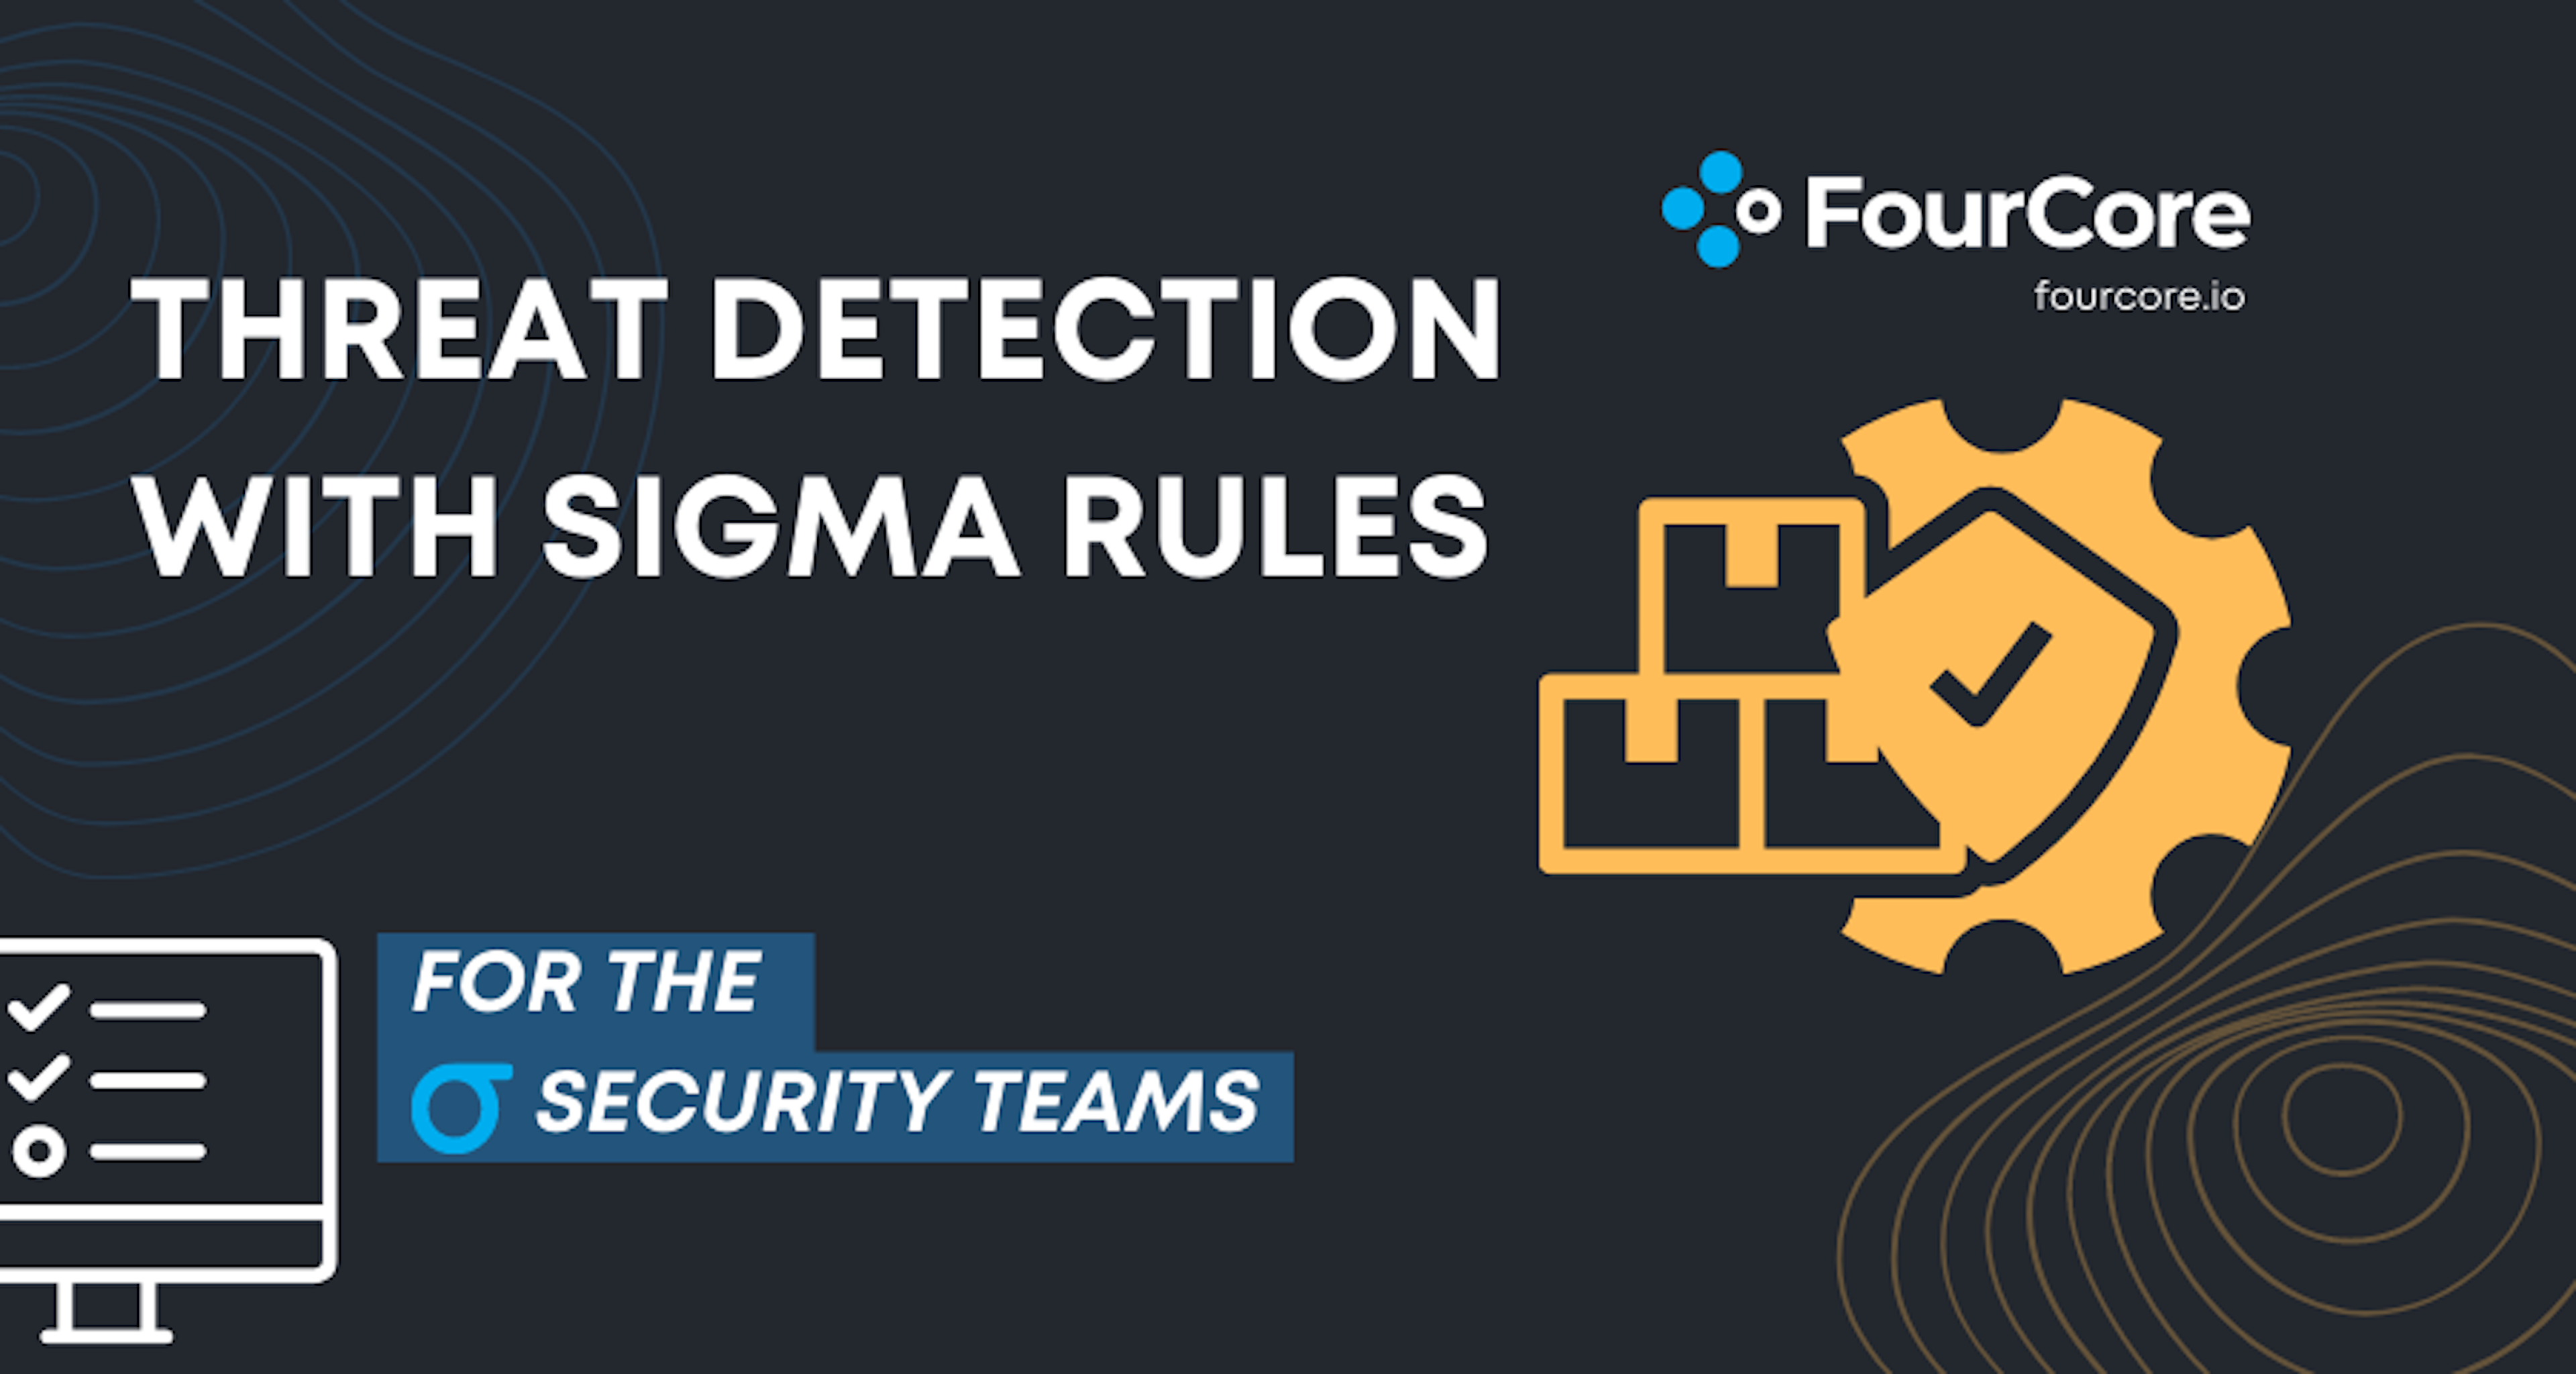 A deep dive into Sigma rules and how to write your own threat detection rules Blog Post Image